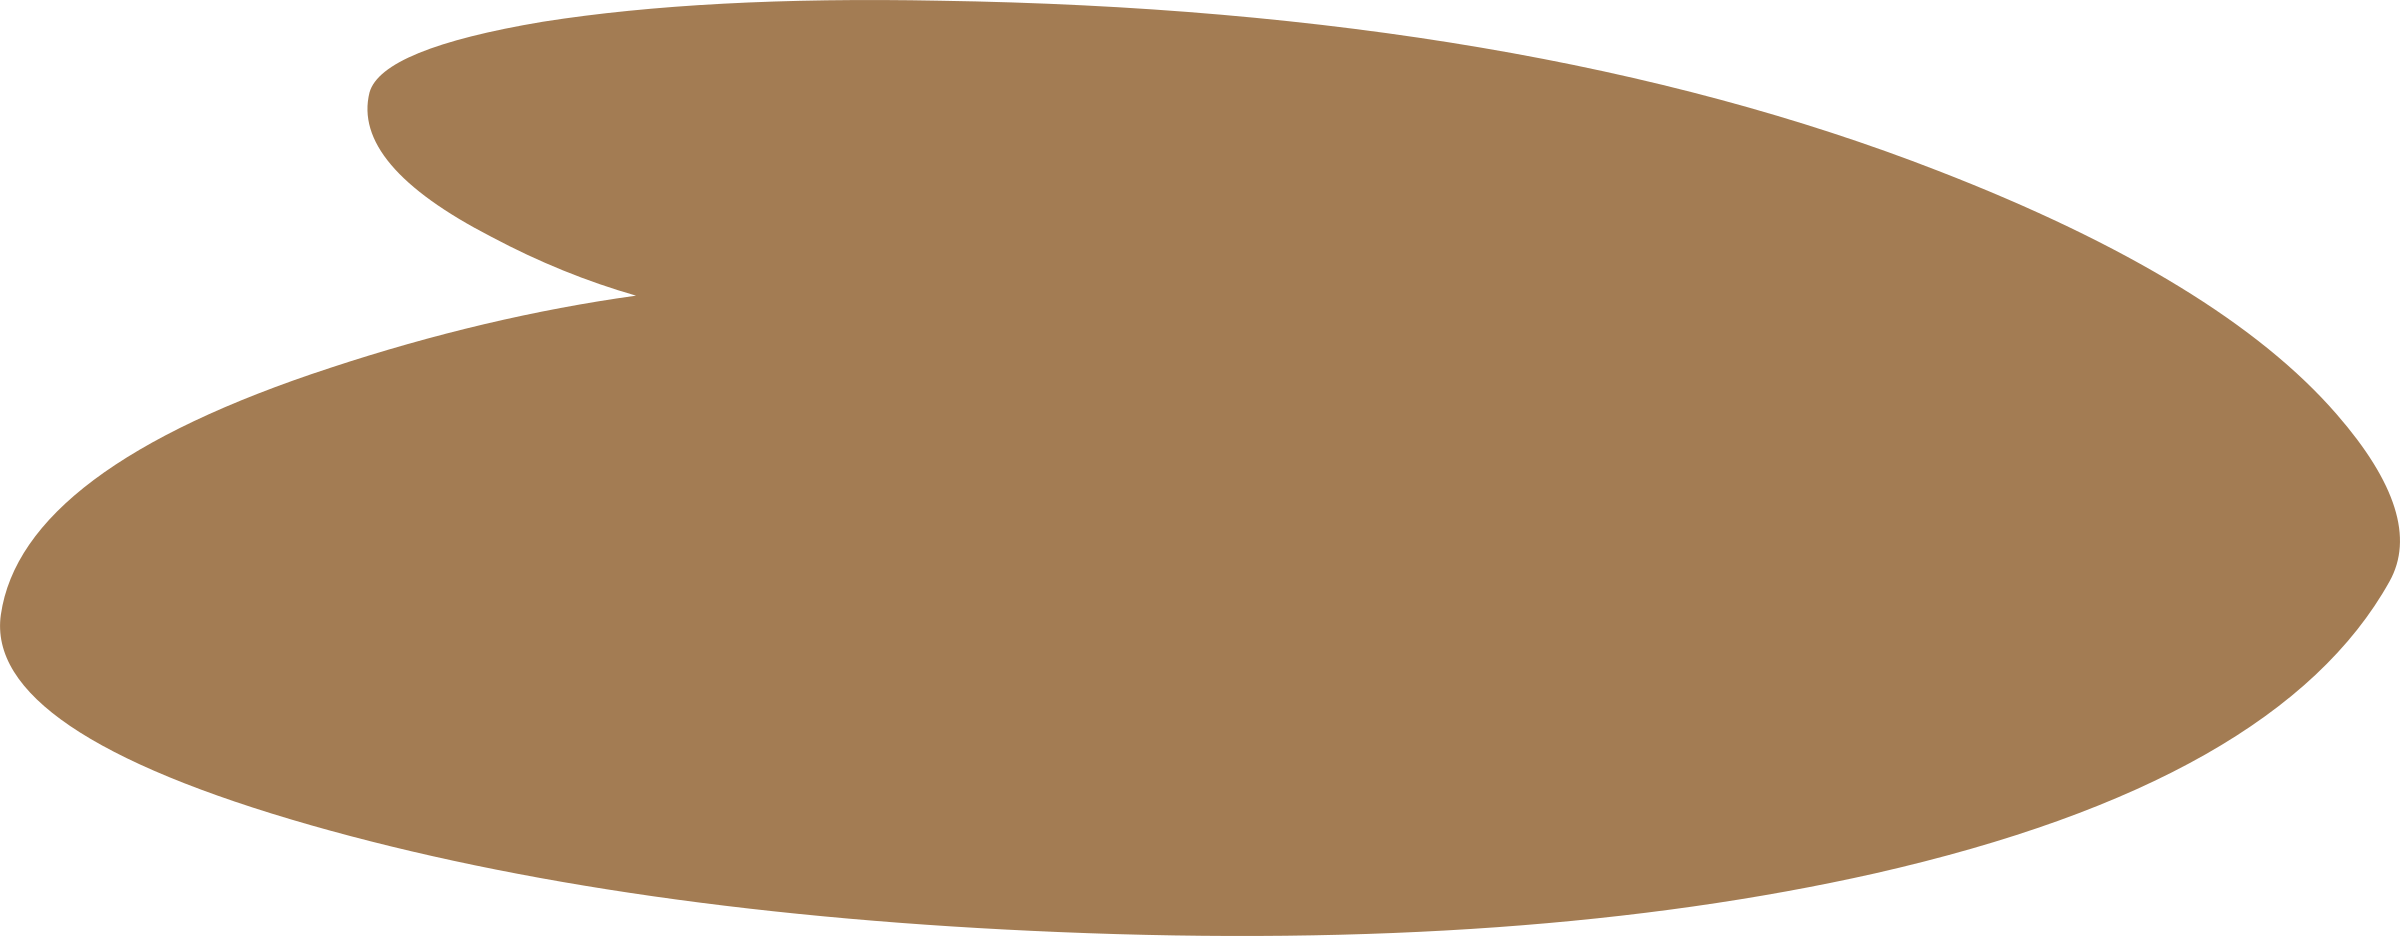 A Brown Rectangle With Black Background